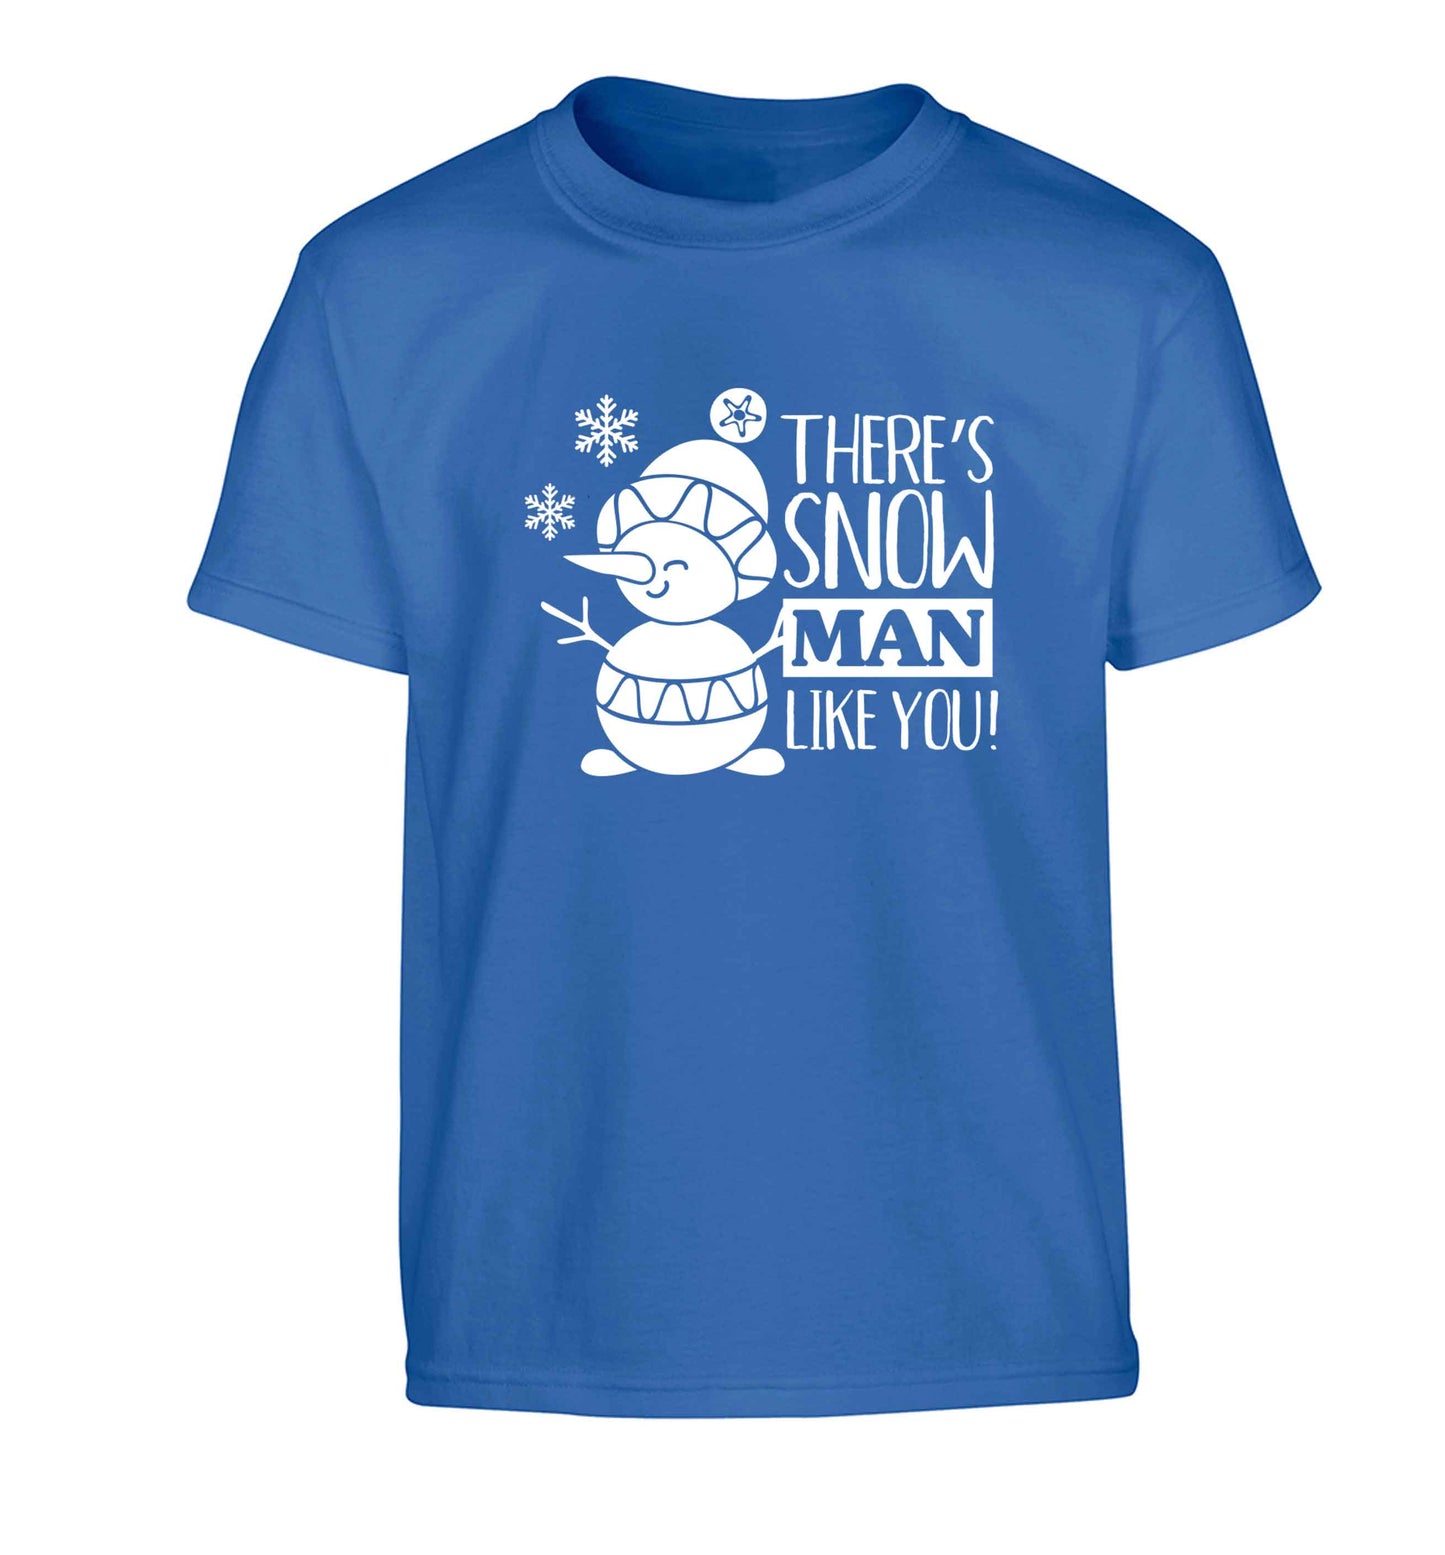 There's snow man like you Children's blue Tshirt 12-13 Years